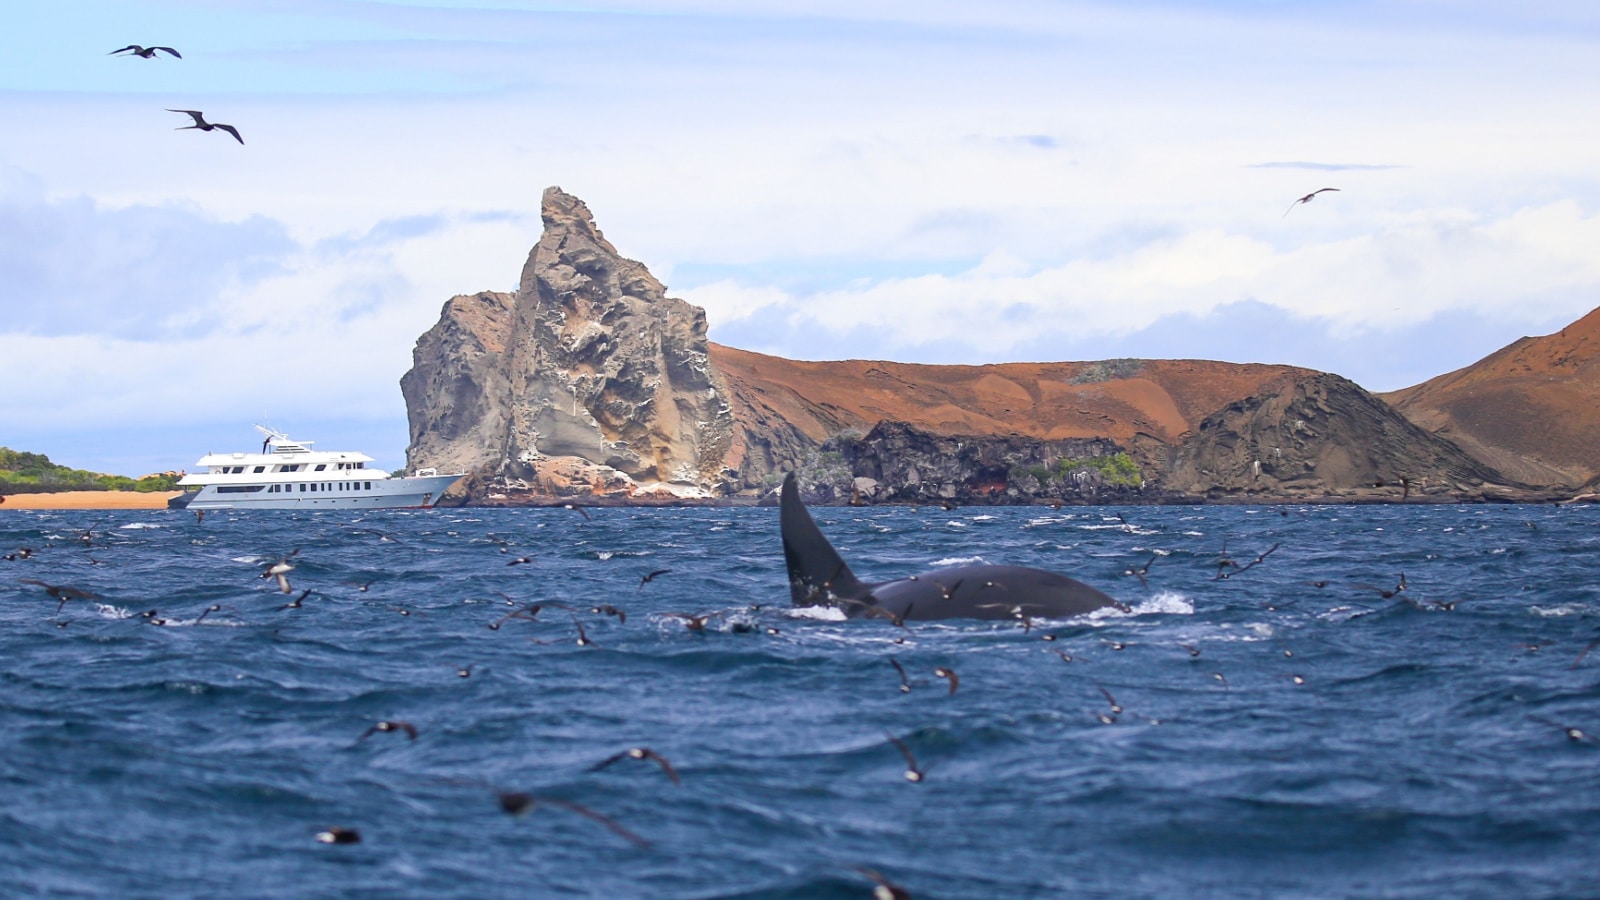 <p>The Galápagos Islands are another sensational place to see diverse wildlife. The boat tours offer the adventure of a lifetime. You’ll see iguanas, sea lions, cormorants, giant tortoises, albatrosses, hawks, penguins, and more. Plus, the guided tours teach you a lot about the islands’ ecosystem.</p>